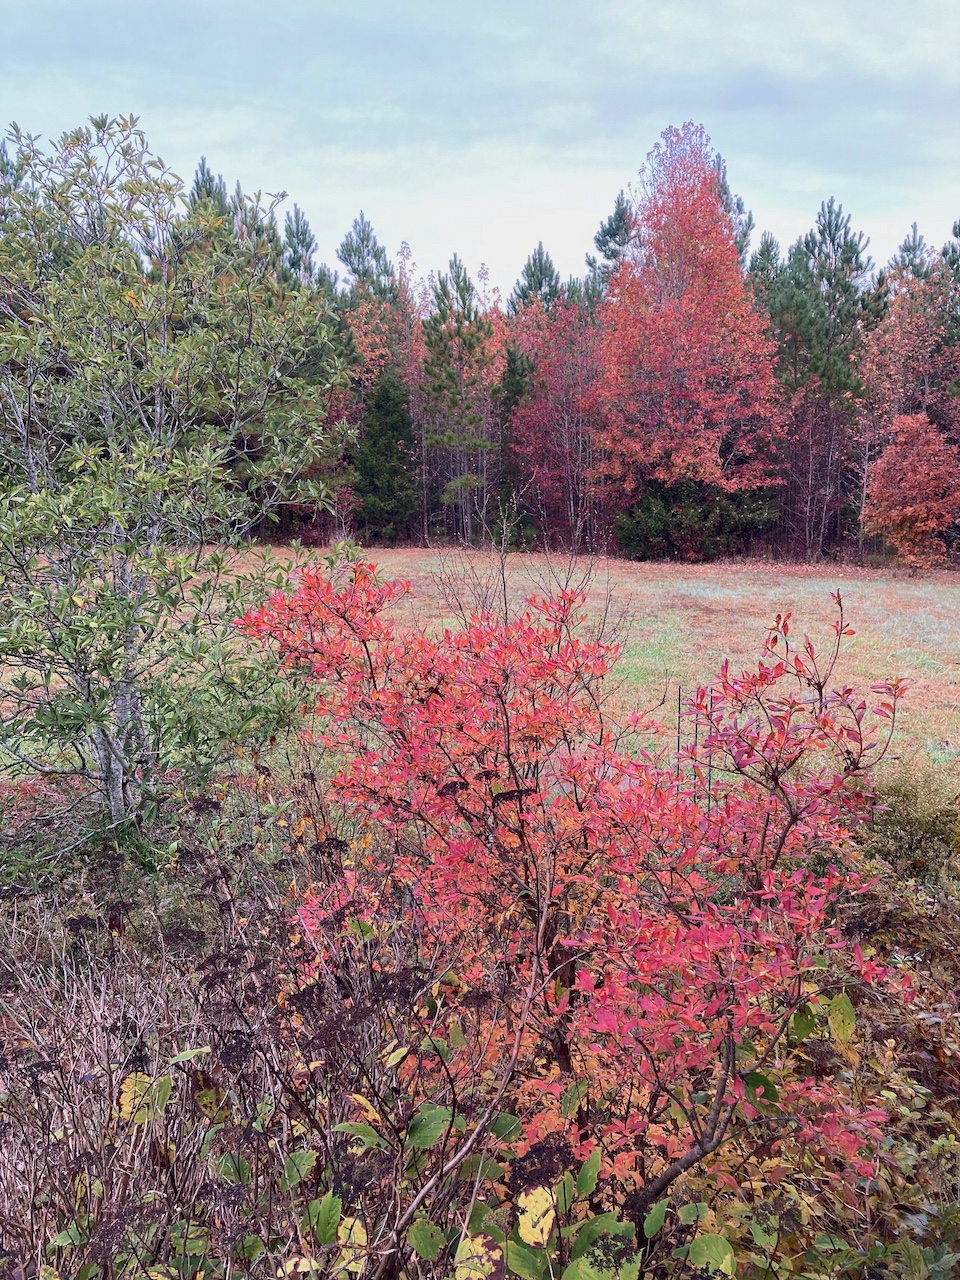 The Scientific Name is Rhododendron viscosum var. viscosum. You will likely hear them called Swamp Azalea, Clammy Azalea. This picture shows the Rhododendron viscosum var. viscosum in the foreground with spectacular Fall color in early November.  of Rhododendron viscosum var. viscosum